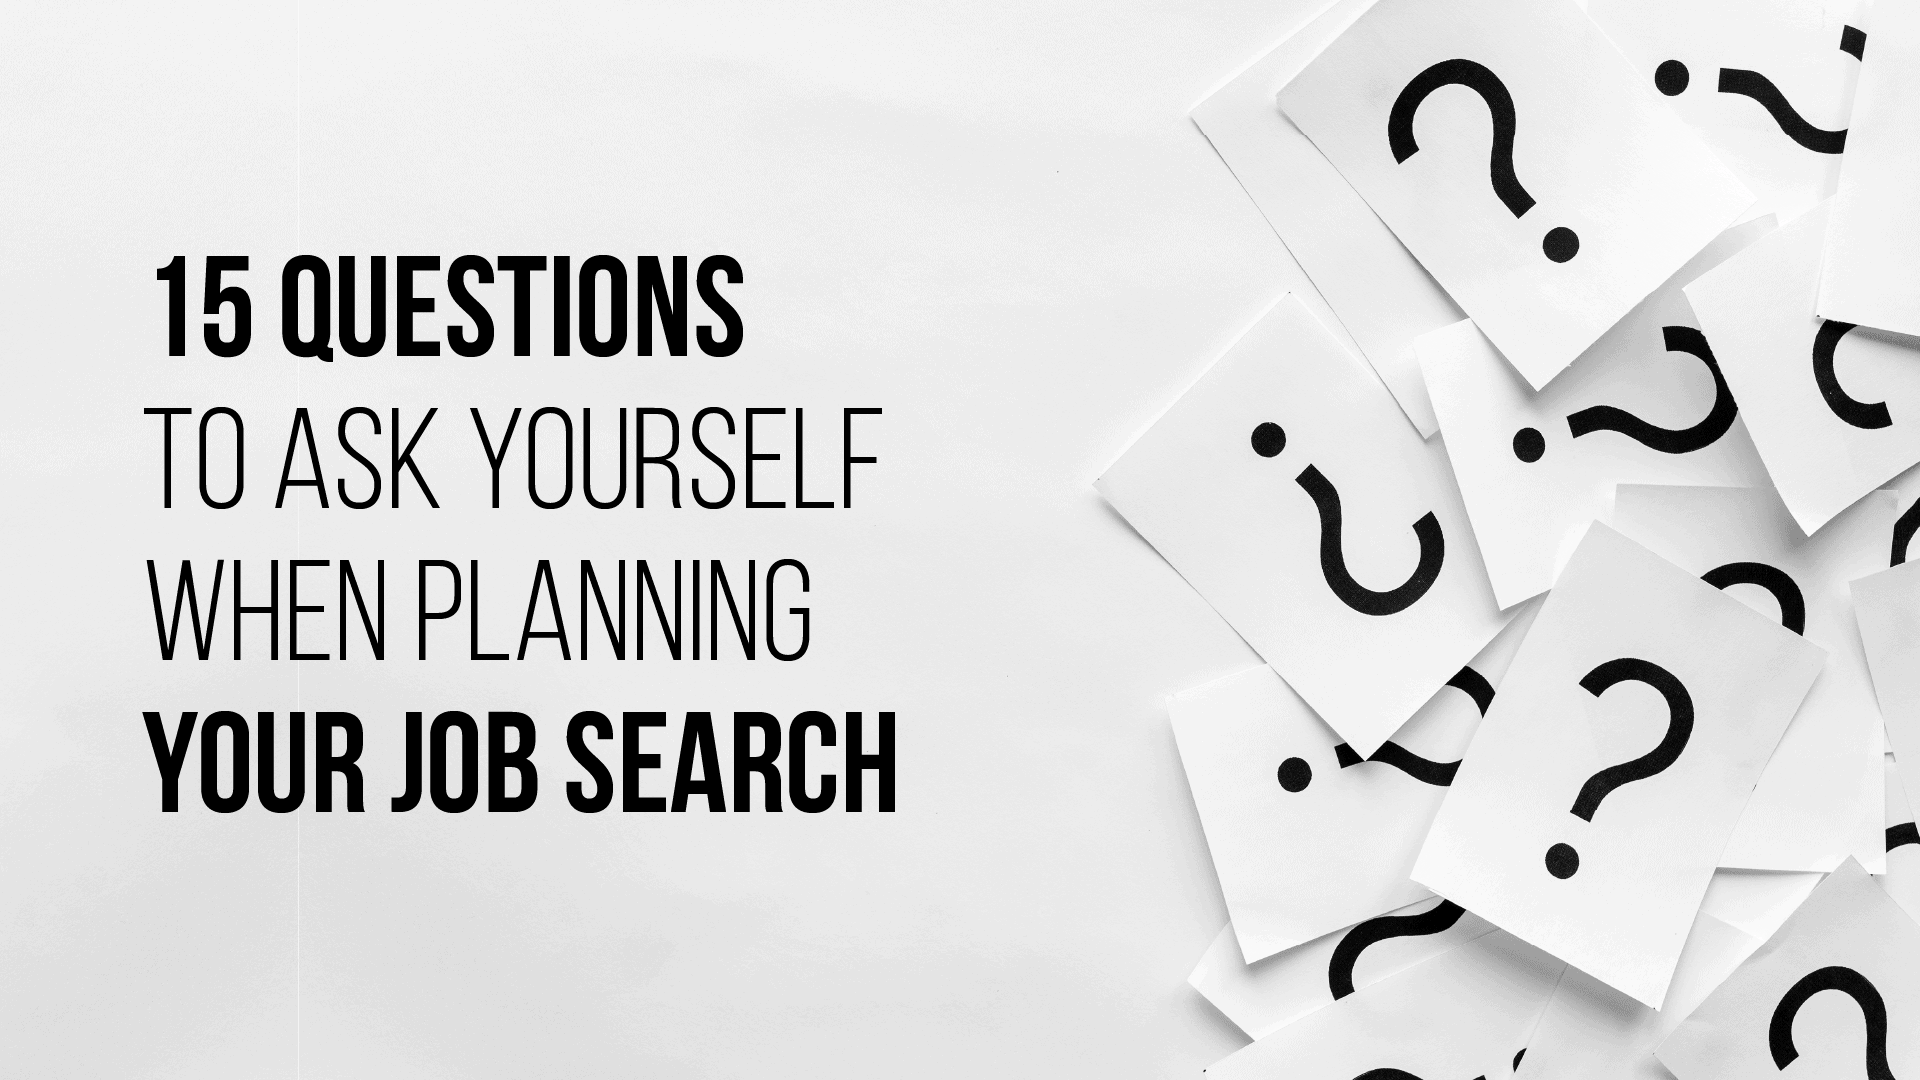 15 Questions to Ask Yourself When Planning Your Job Search